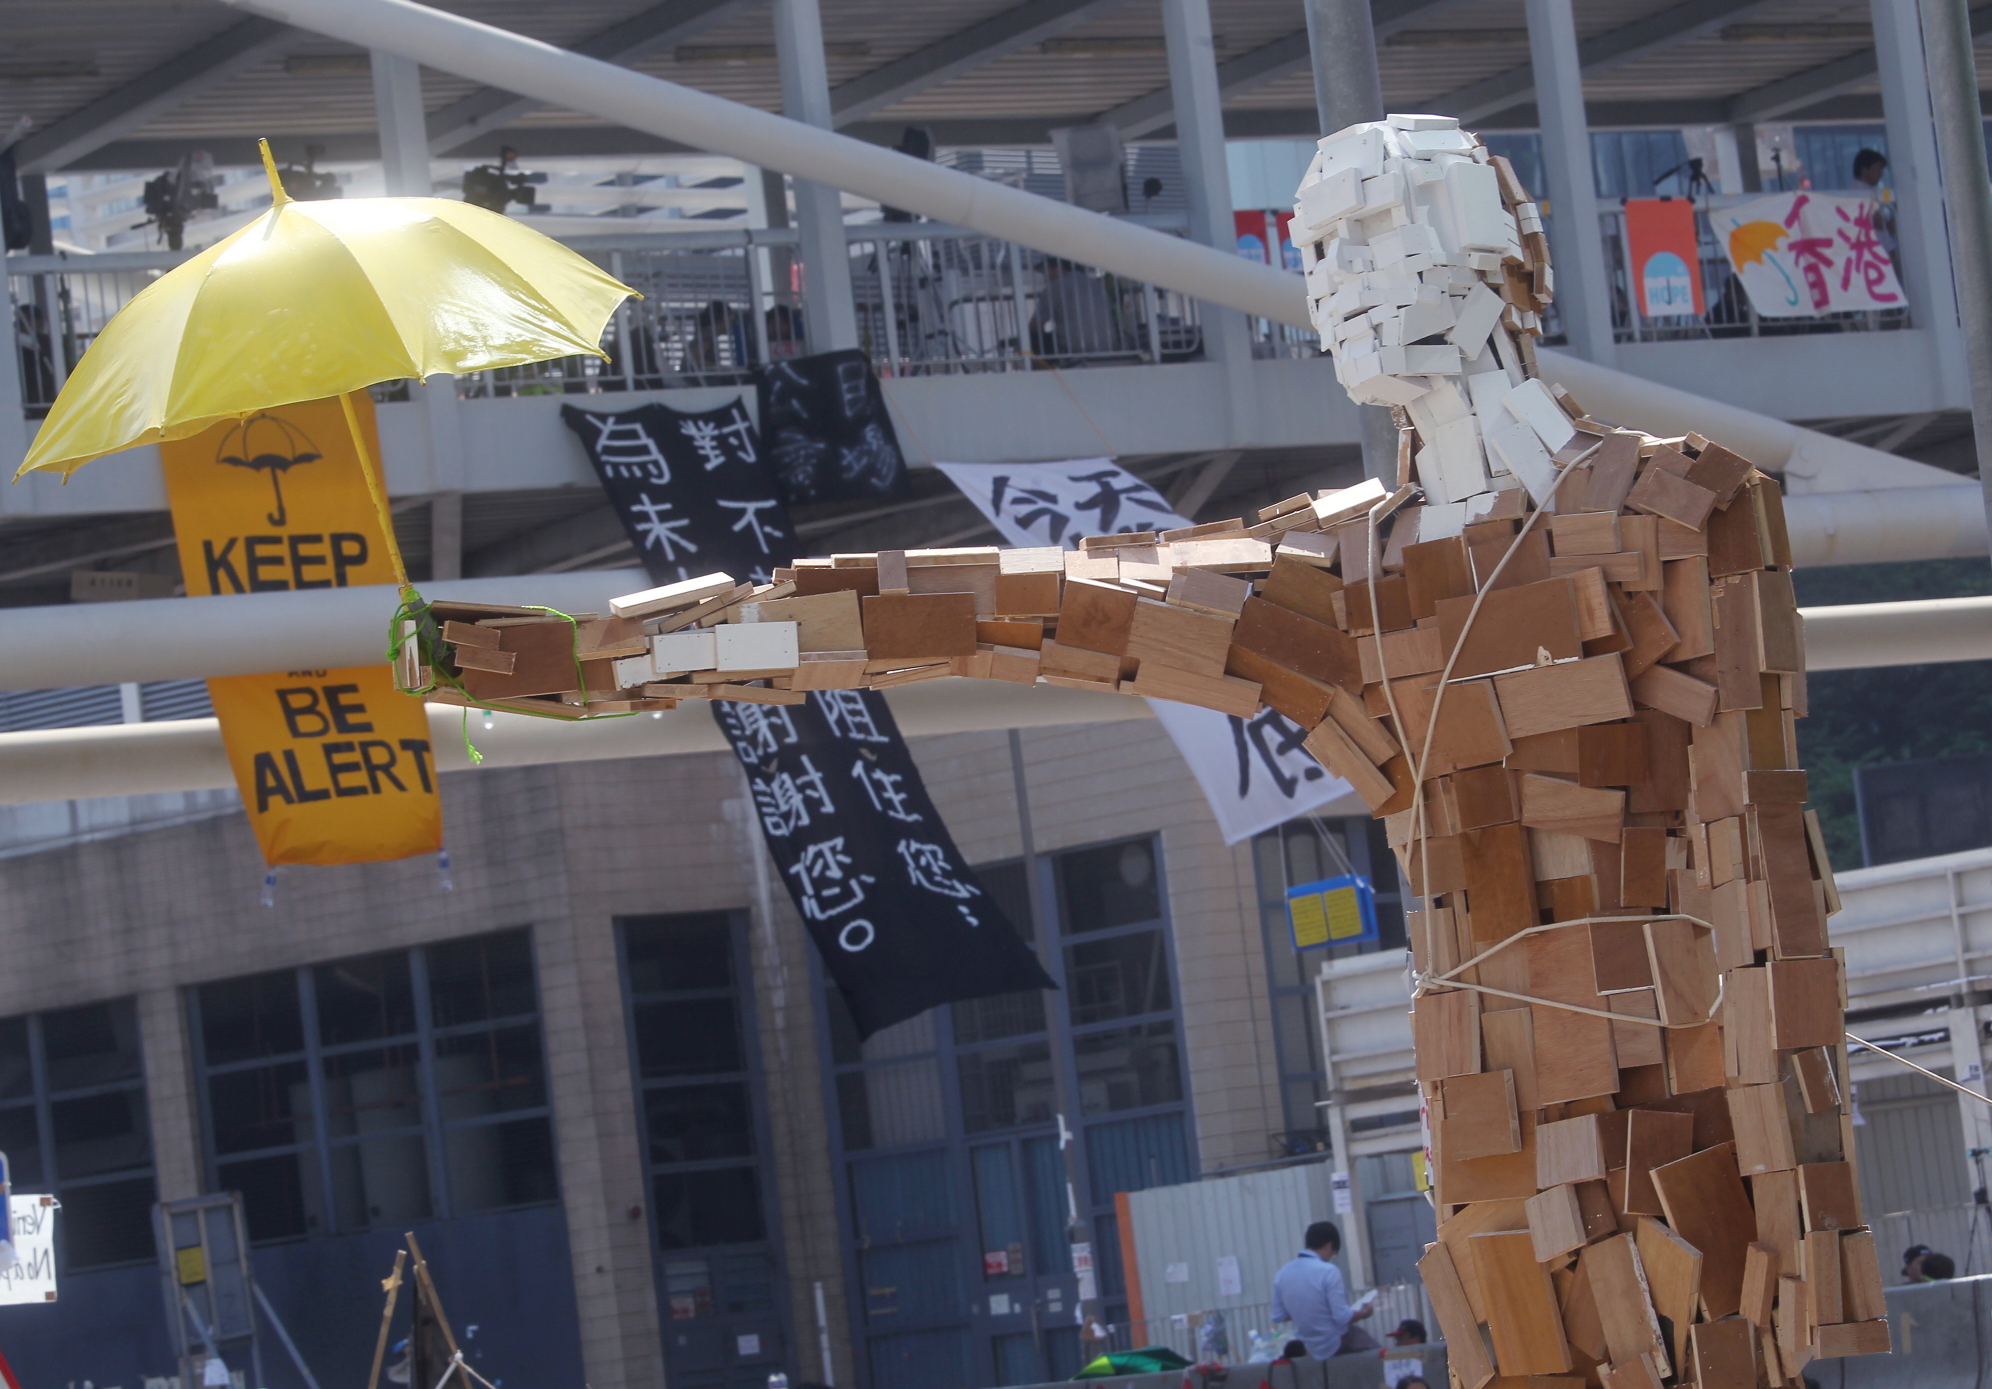 The statue "Umbrella Man" by the Hong Kong artist known as Milk, stands at a protest site next to the central government offices in Admiralty. Photo: SCMP/May Tse